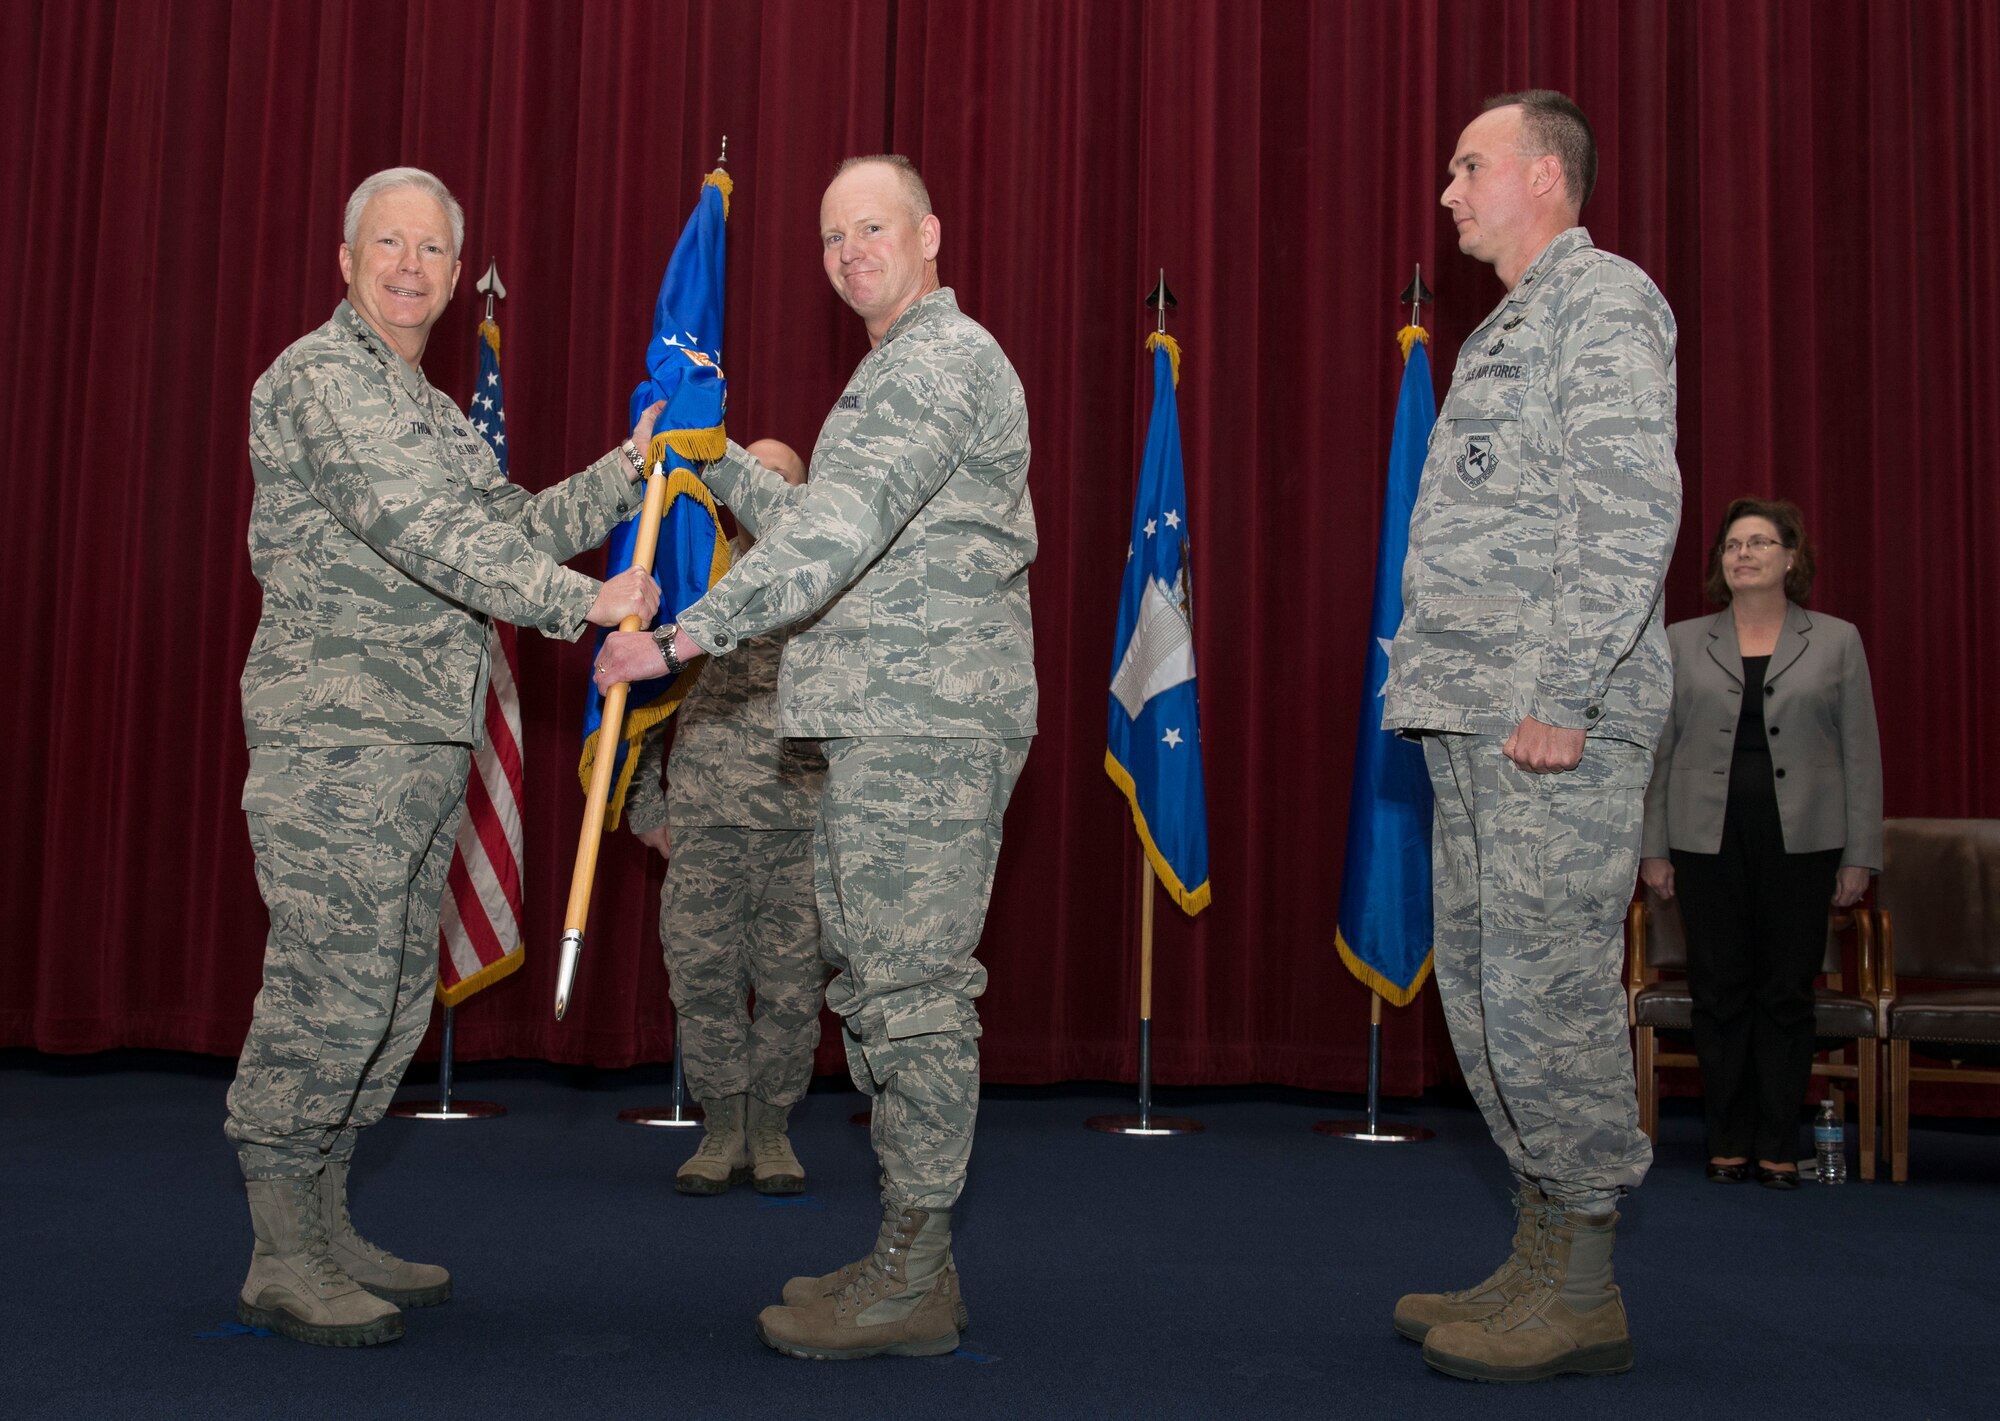 Lt. Gen. John Thompson, commander, Air Force Life Cycle Management Center (L), passes guidon to Brig. Gen. Michael Schmidt (R) during an April 8 change of leadership ceremony. Schmidt is the new Program Executive Officer for the Fighters and Bombers Directorate and is responsible for the development, production, fielding, sustainment and modernization of fighters and bombers throughout the Air Force fleet. In addition he is also responsible for organizing, training, and equipping the F-35 System Program Office.
 (U.S. Air Force photo by Michelle Gigante)
